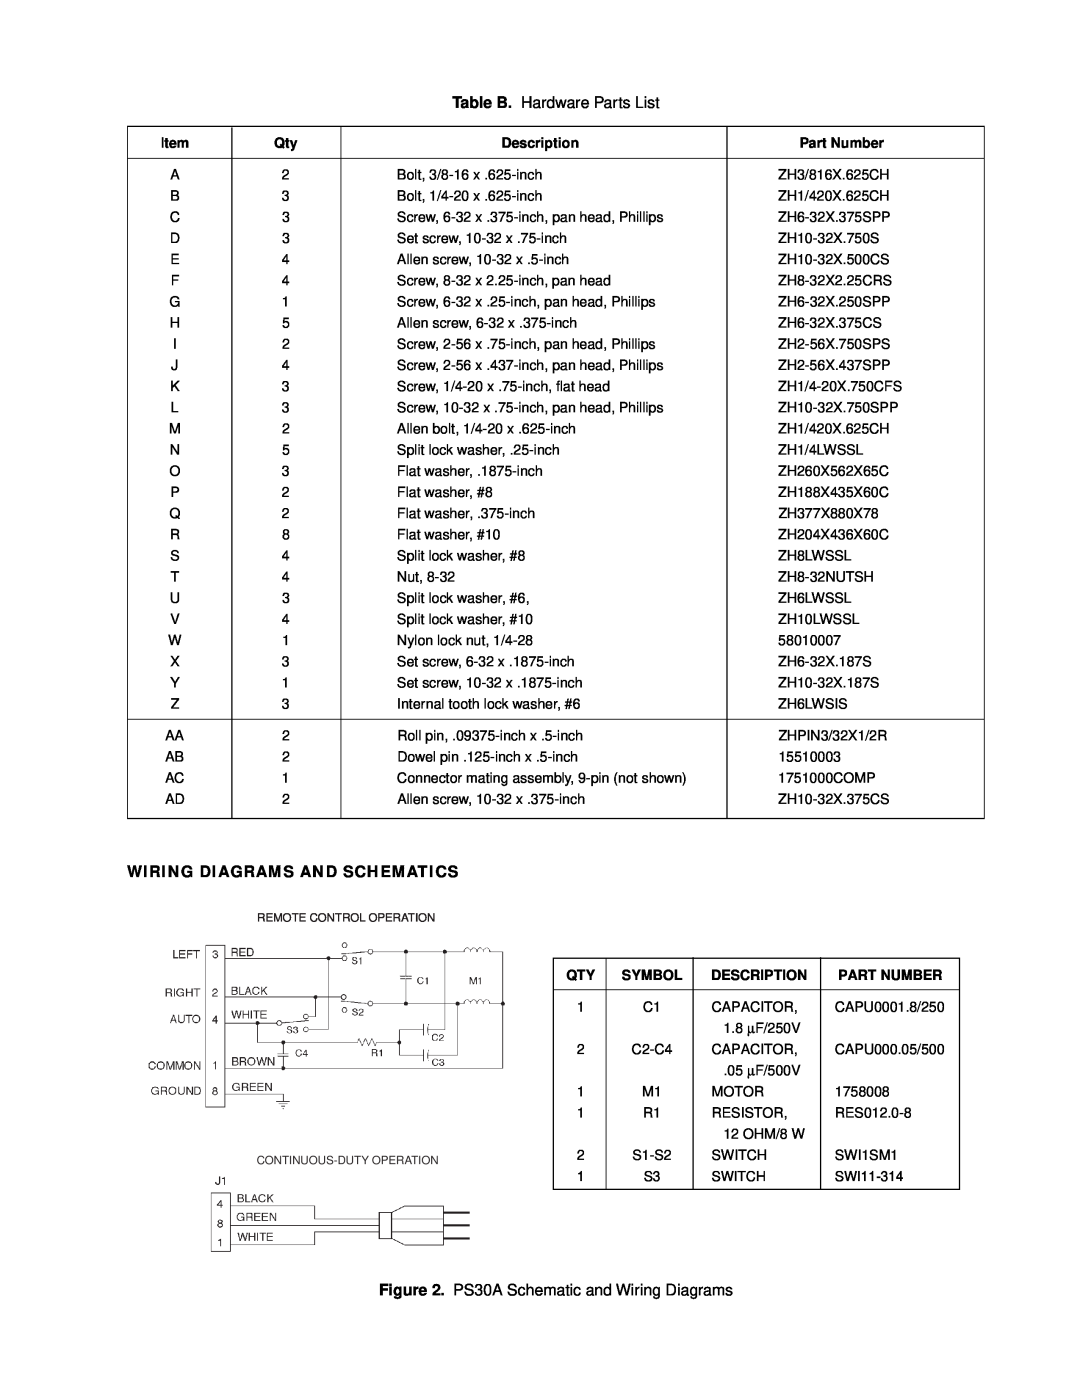 Pelco PS30-24 Table B. Hardware Parts List, Wiring Diagrams And Schematics, PS30A Schematic and Wiring Diagrams, Symbol 